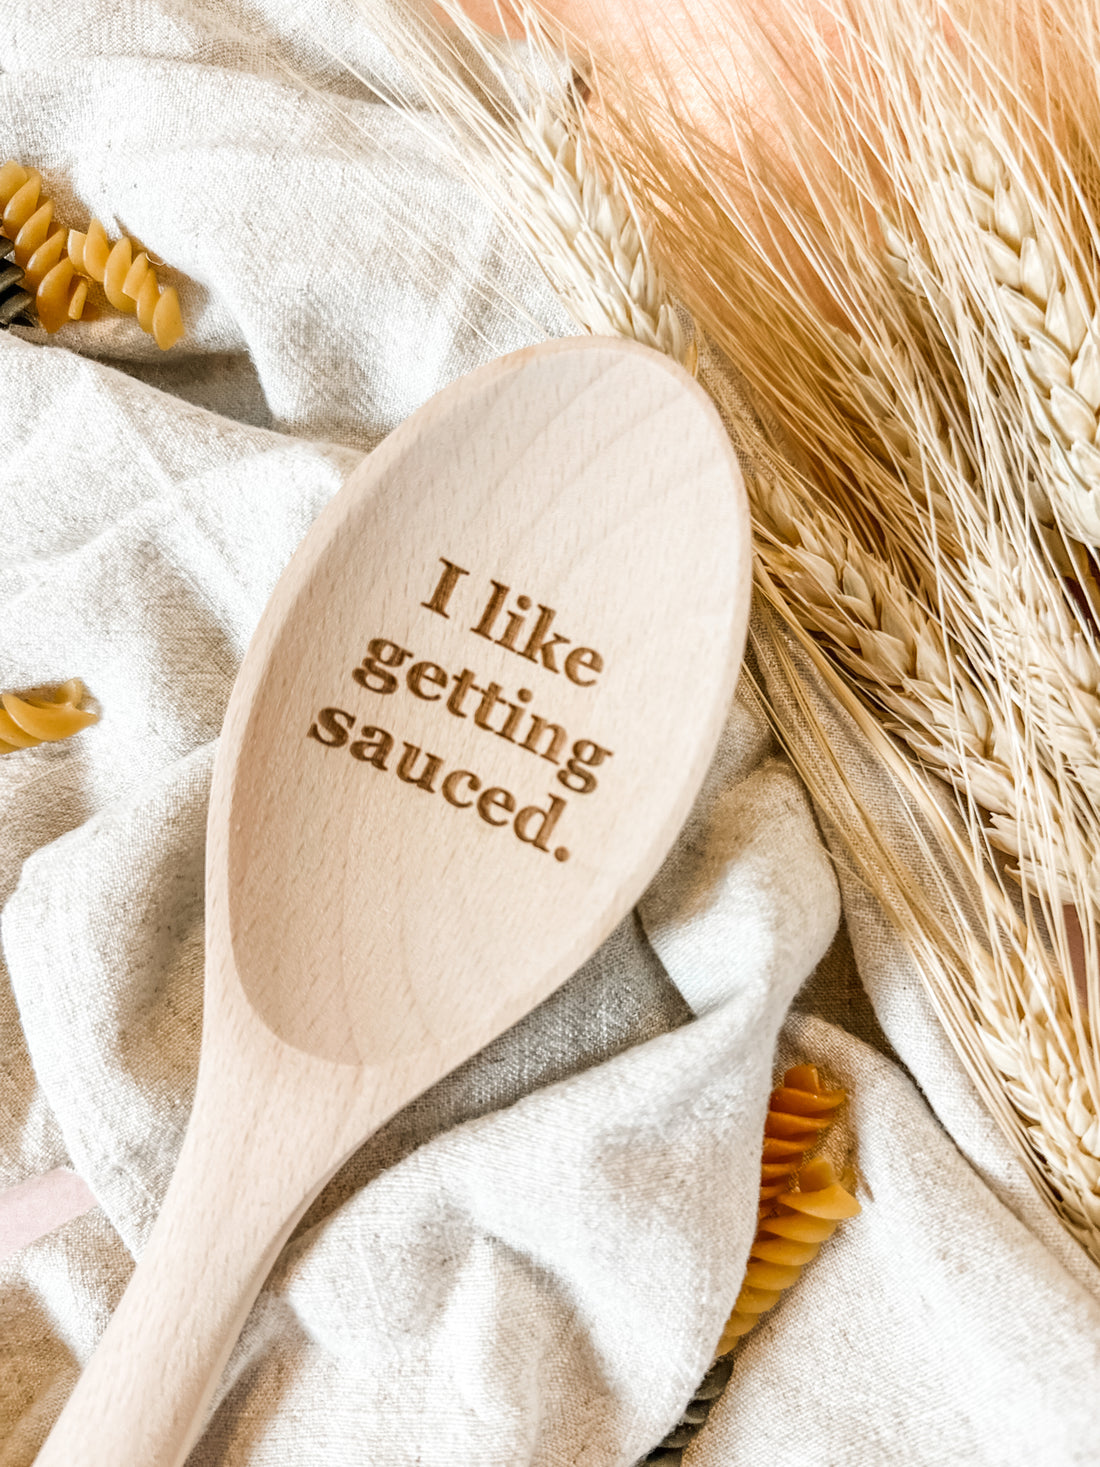 I Like Getting Sauced - Wooden Spoon